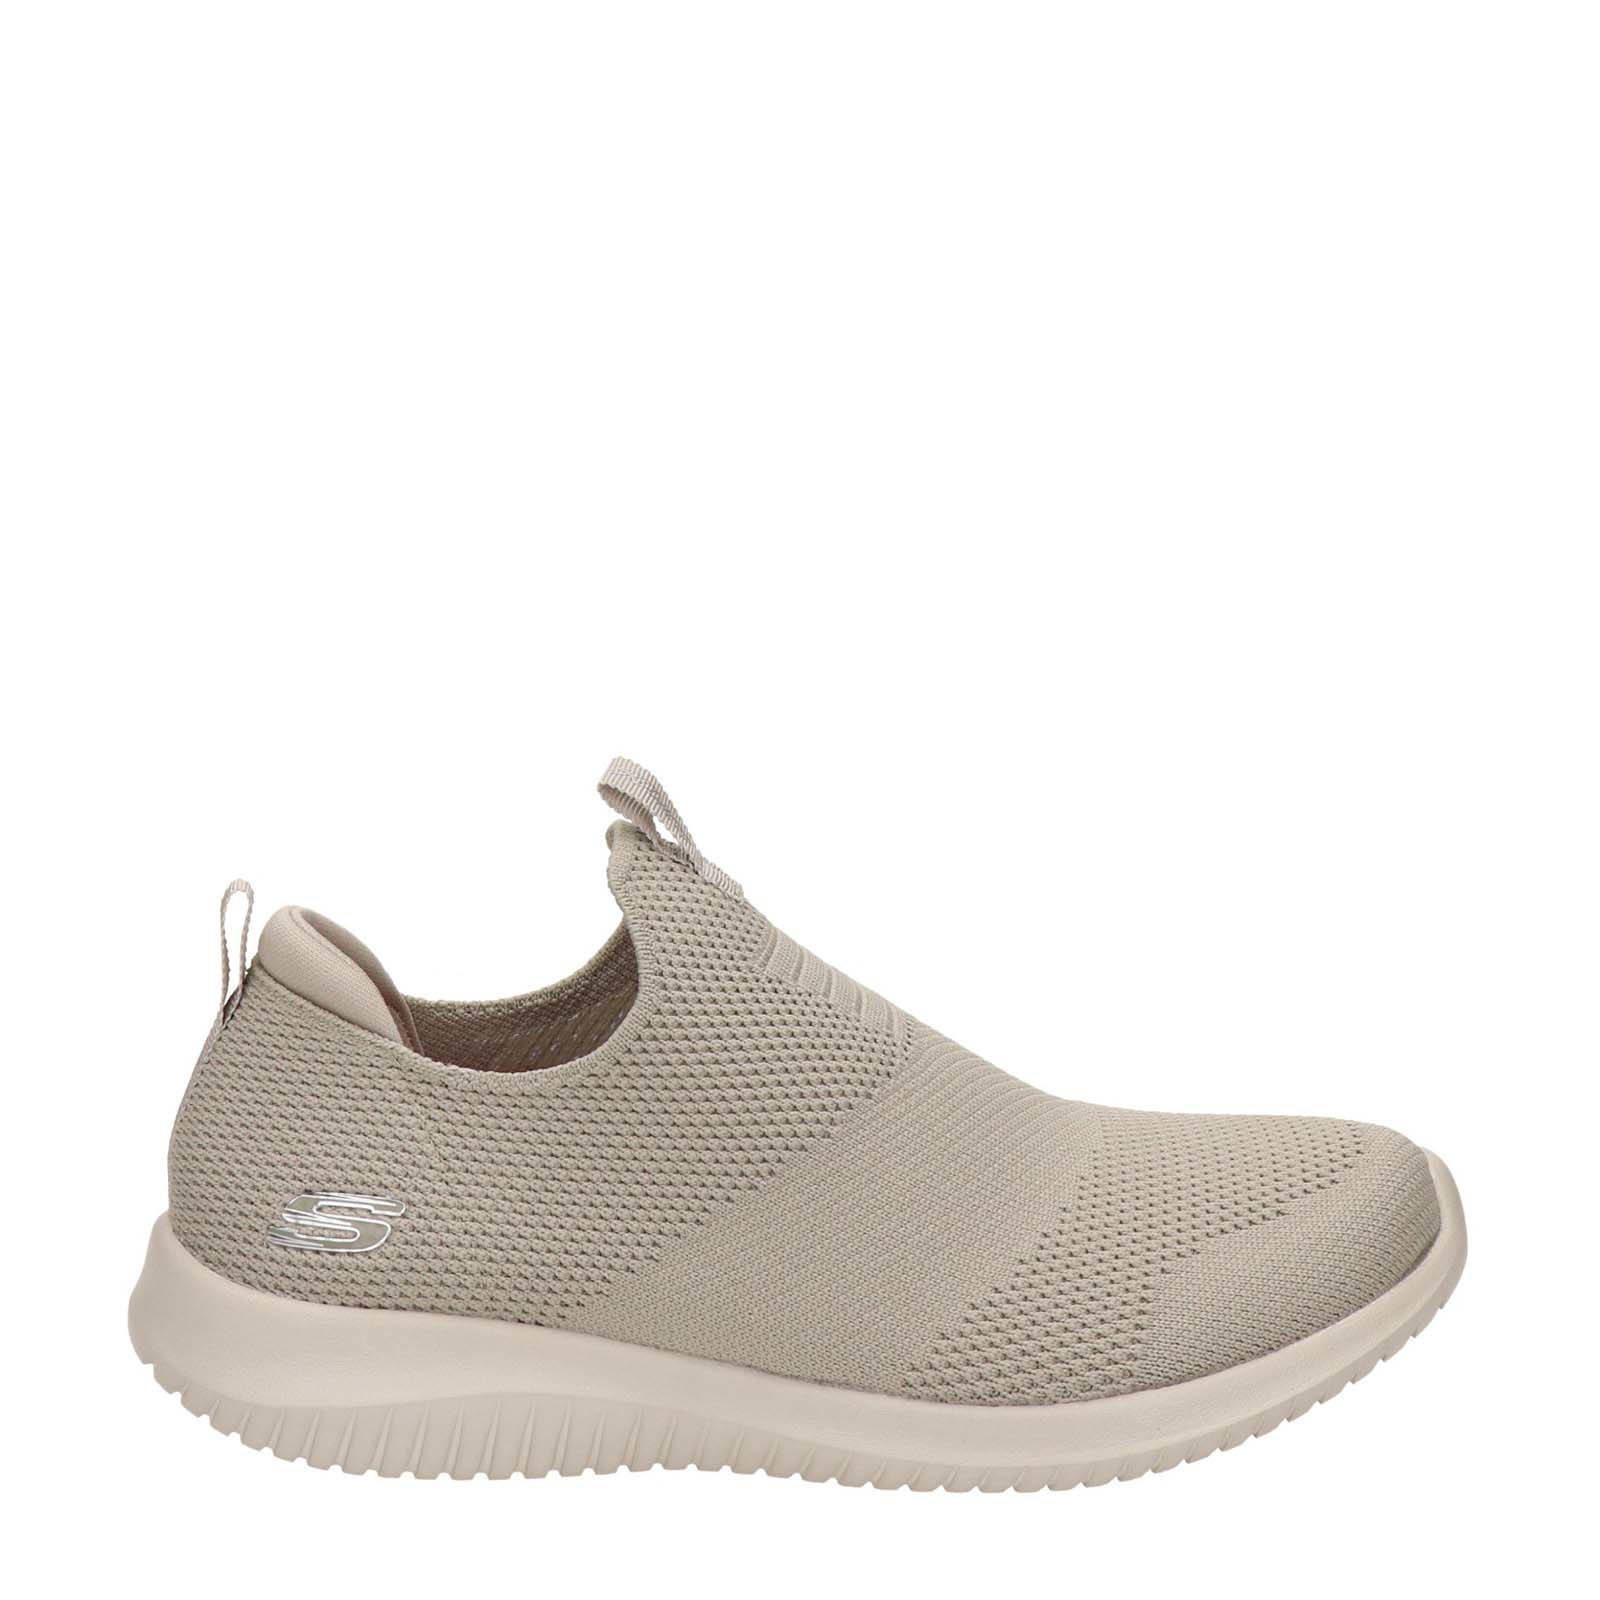 Skechers Knit Slip On Portugal, SAVE 40% aveclumiere.com